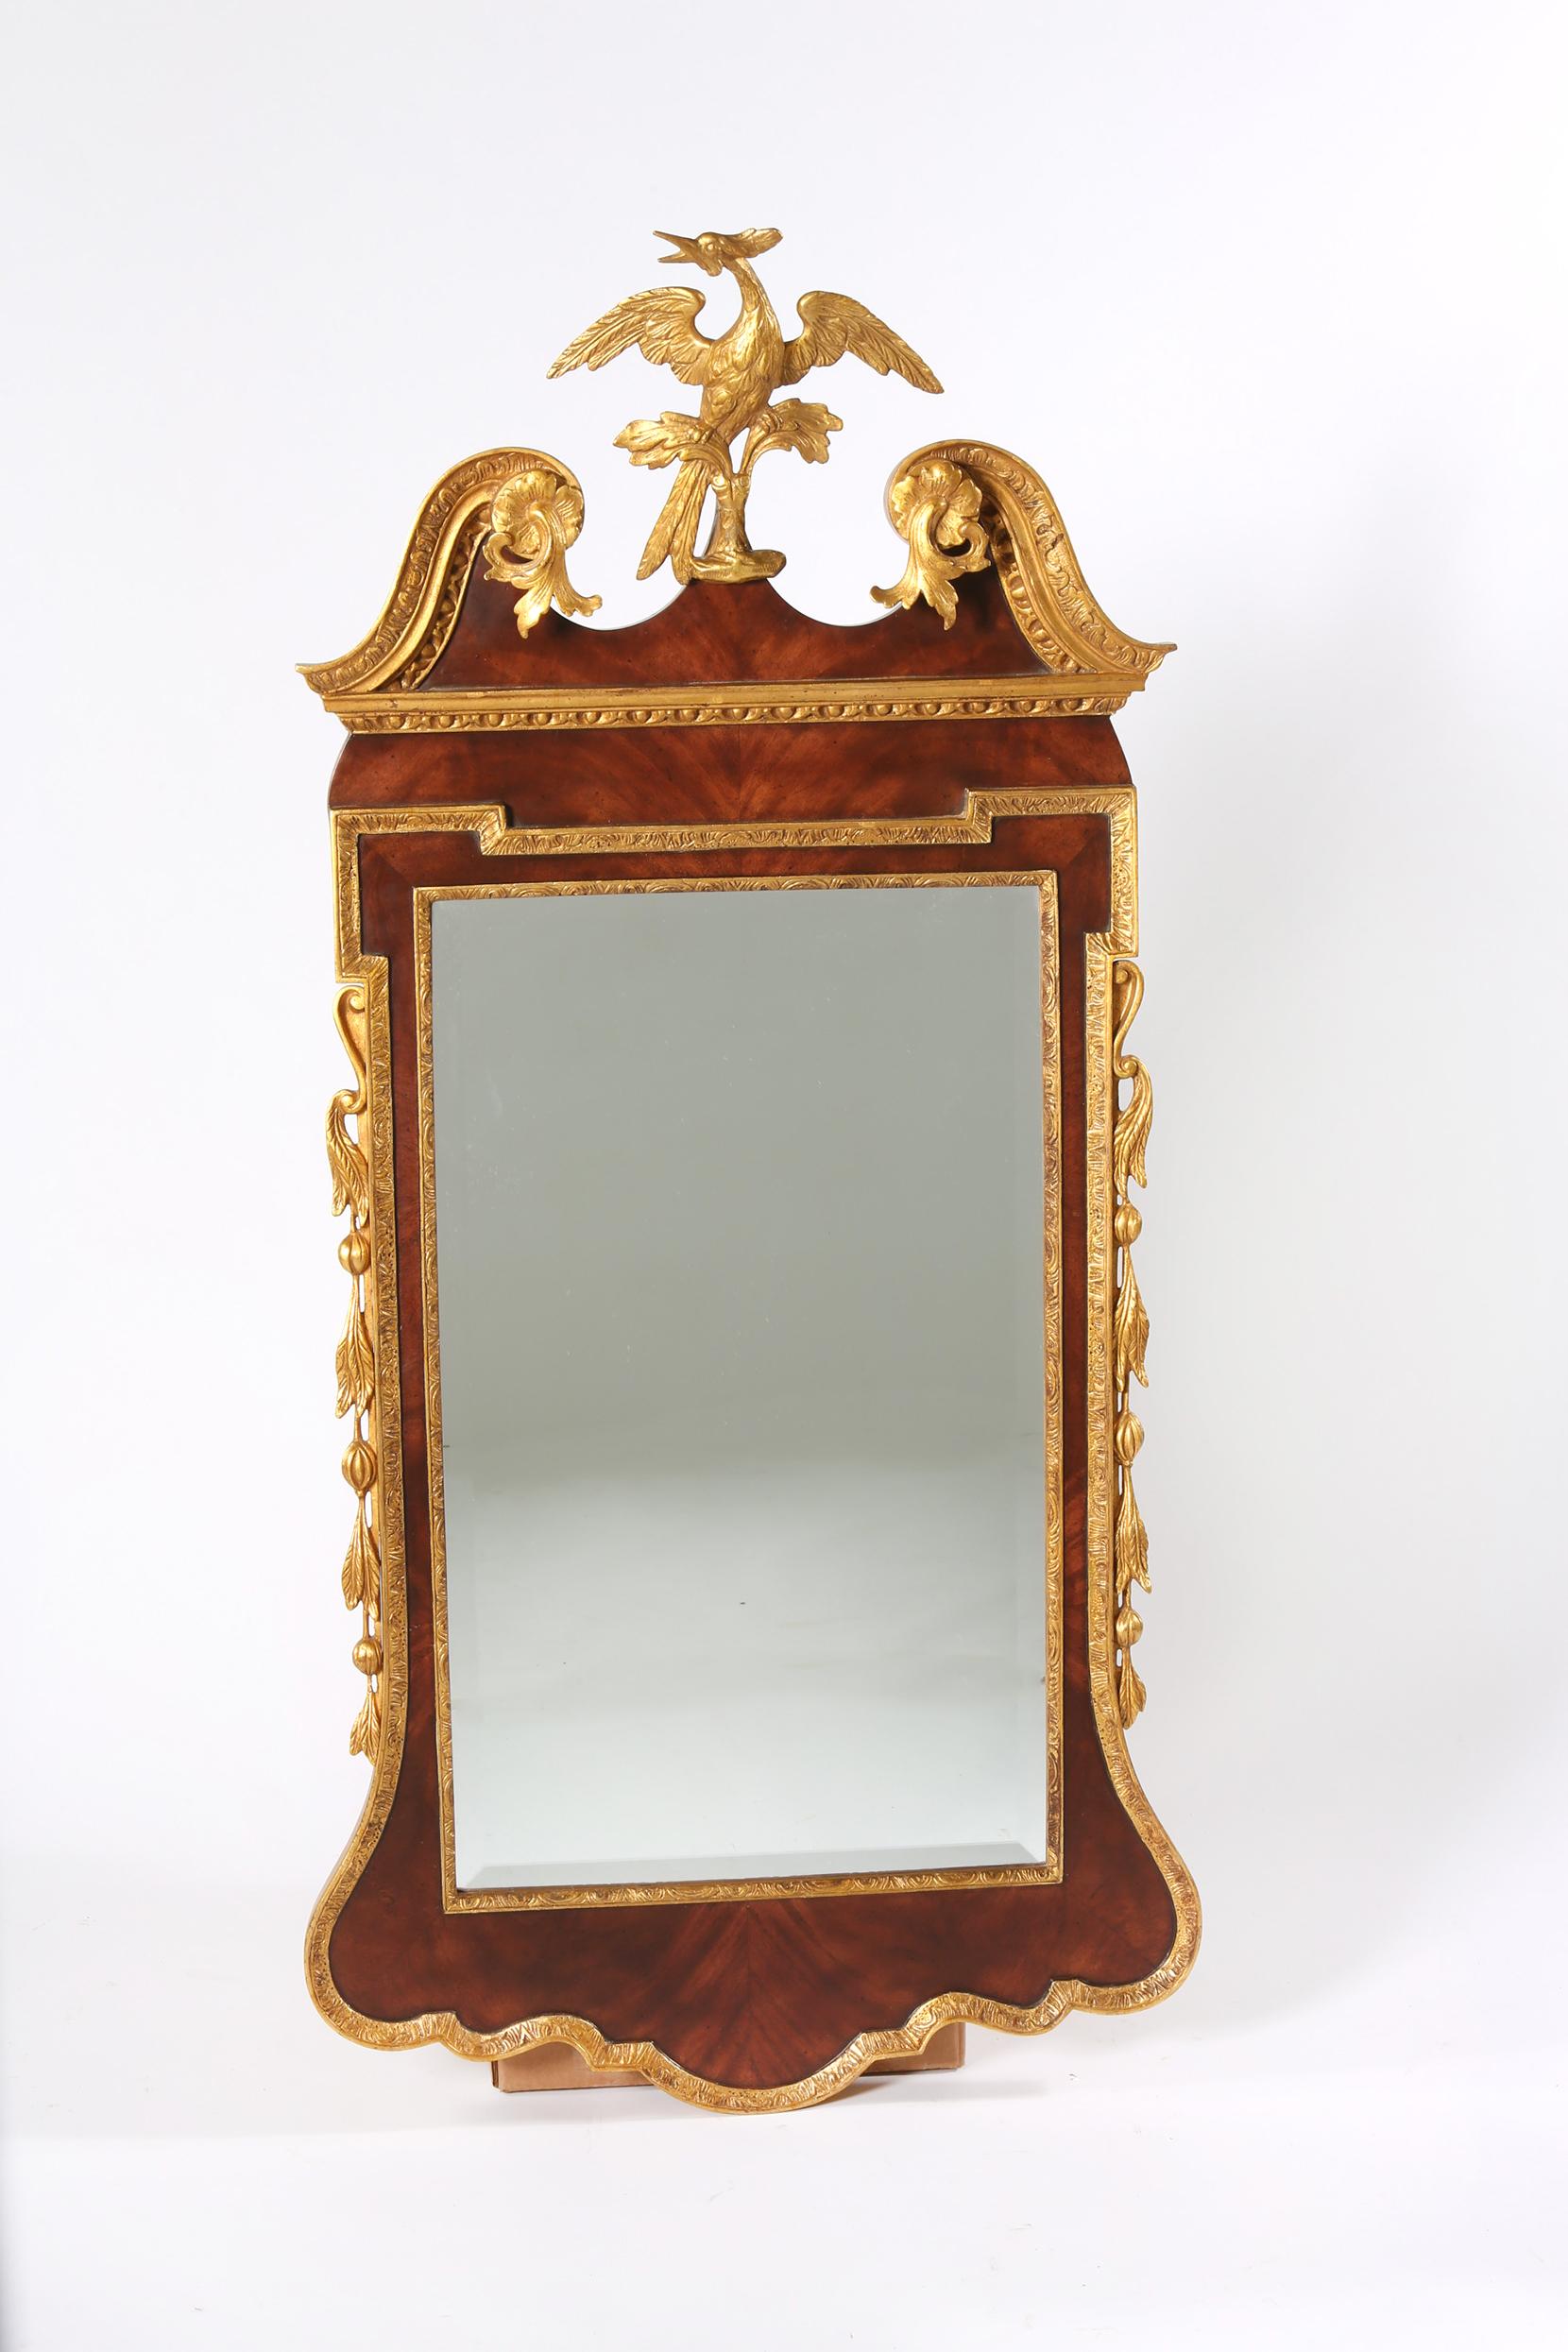 Mahogany wood hand carved framed with gilt bird crown top hanging wall mirror. The mirror is in good condition with minor wear consistent with age / use. Repaired made to the bird crown top / restored and refinished. The mirror measure about: 53